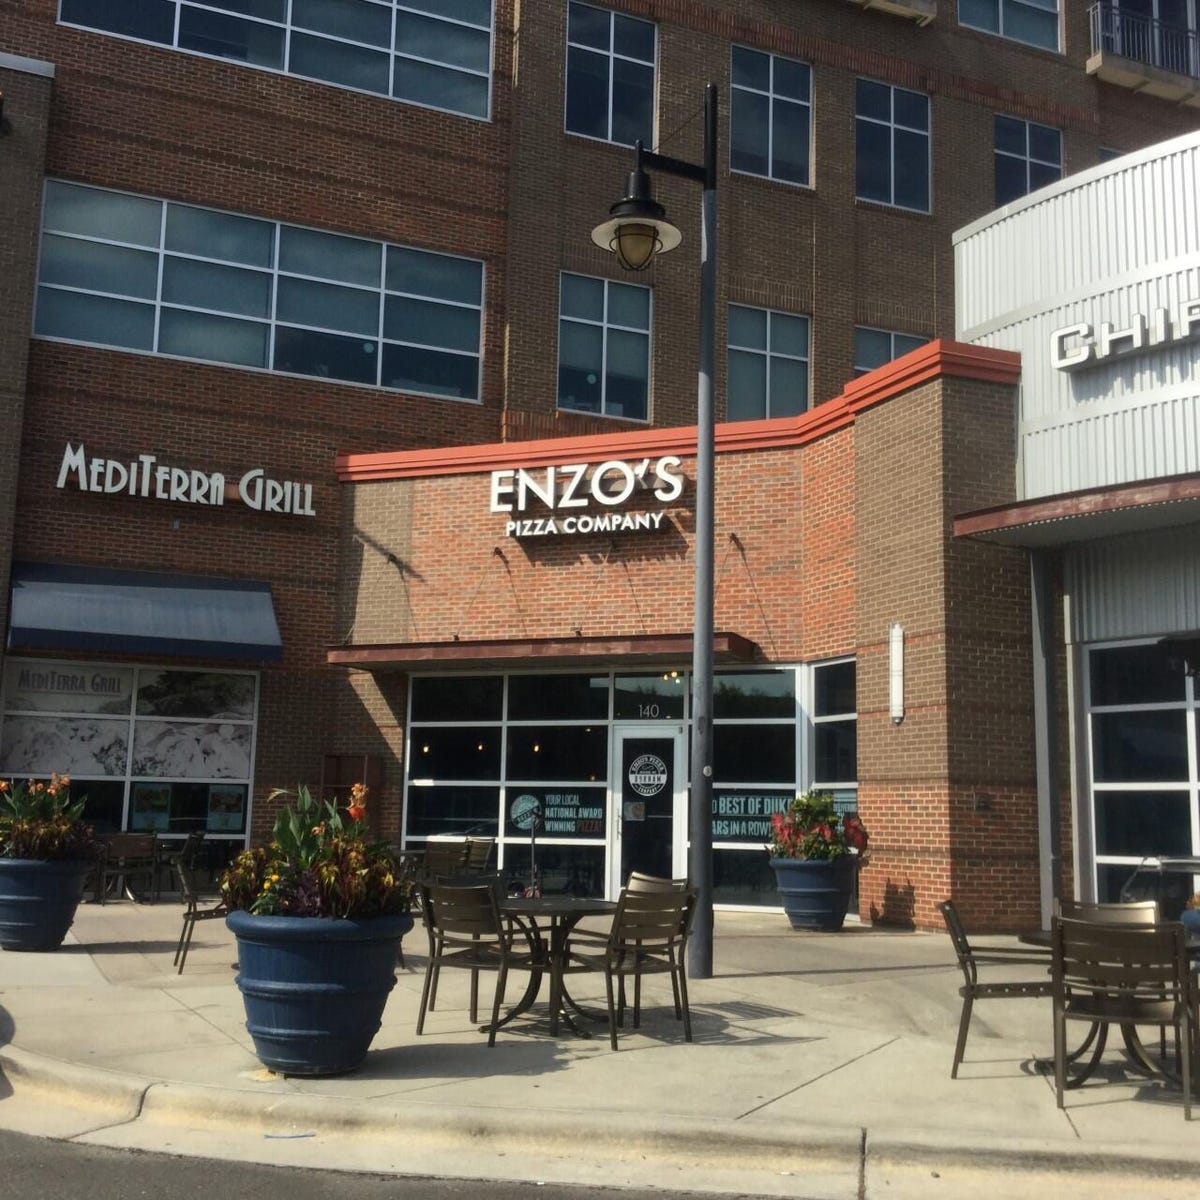 Between Enzo's Pizza Company, MediTerra Grill and Chipotle's